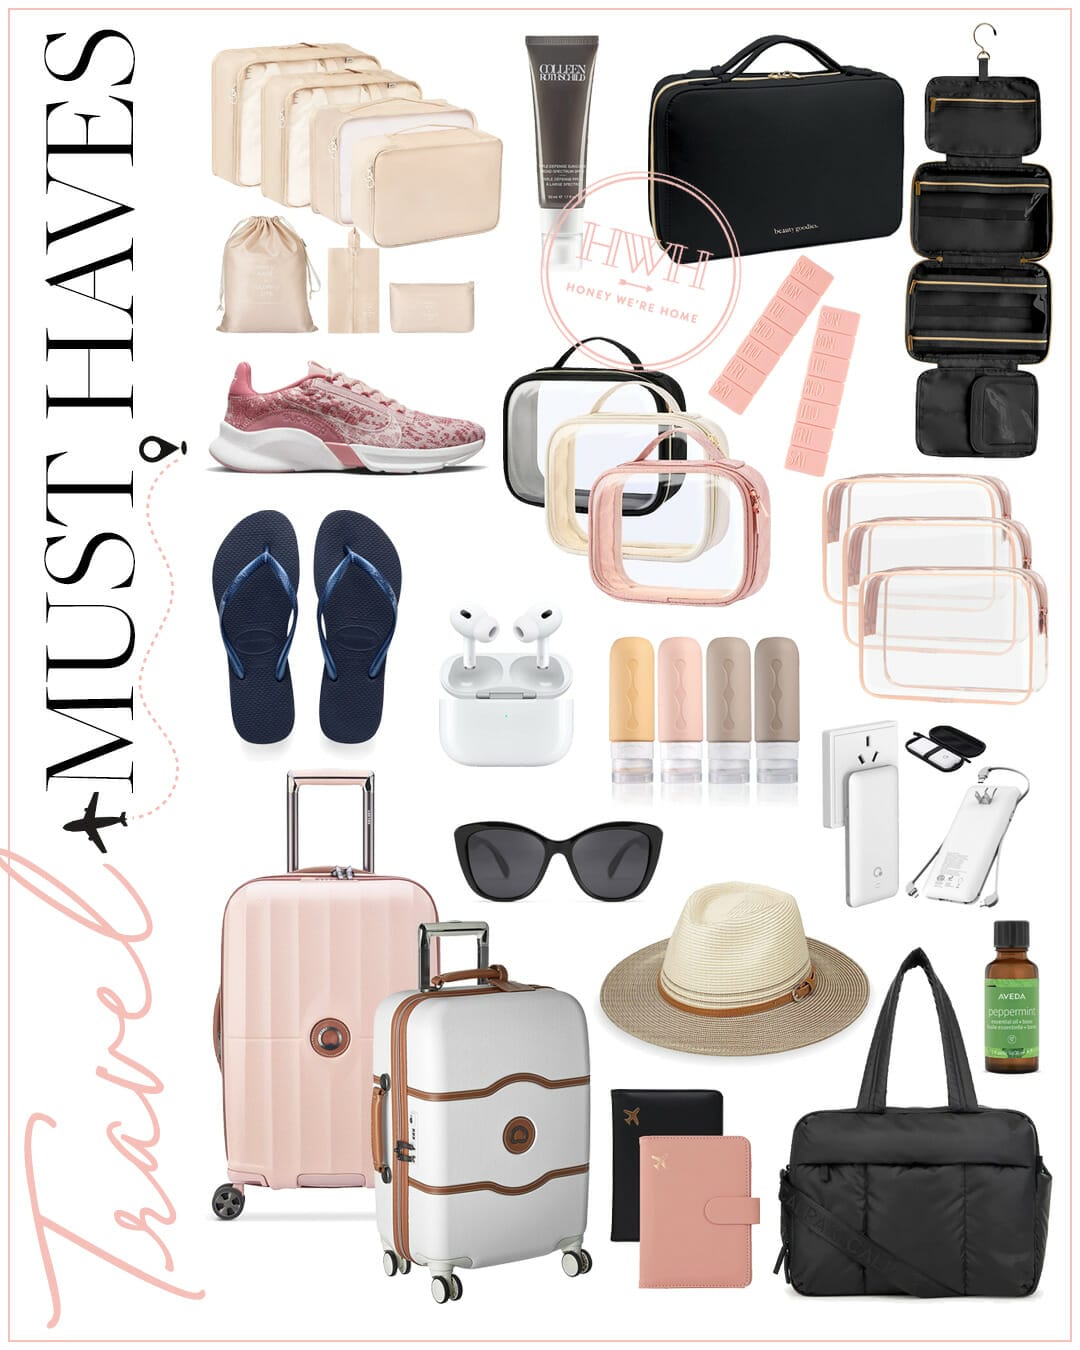 All My Travel Essentials - wit & whimsy, travel essentials